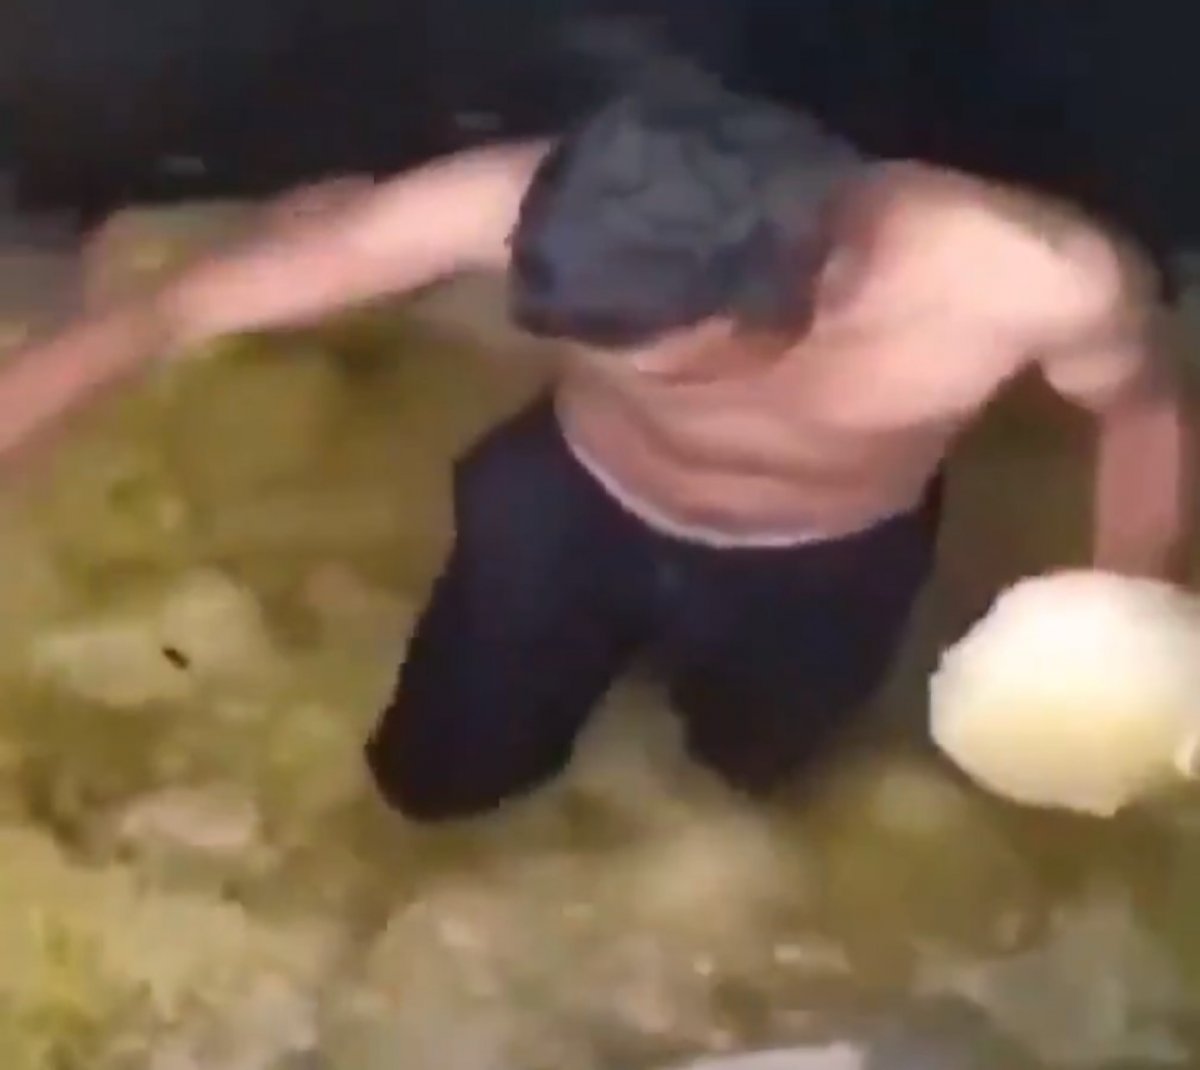 In Sanliurfa, worker entered pickle tank with bare feet # 1